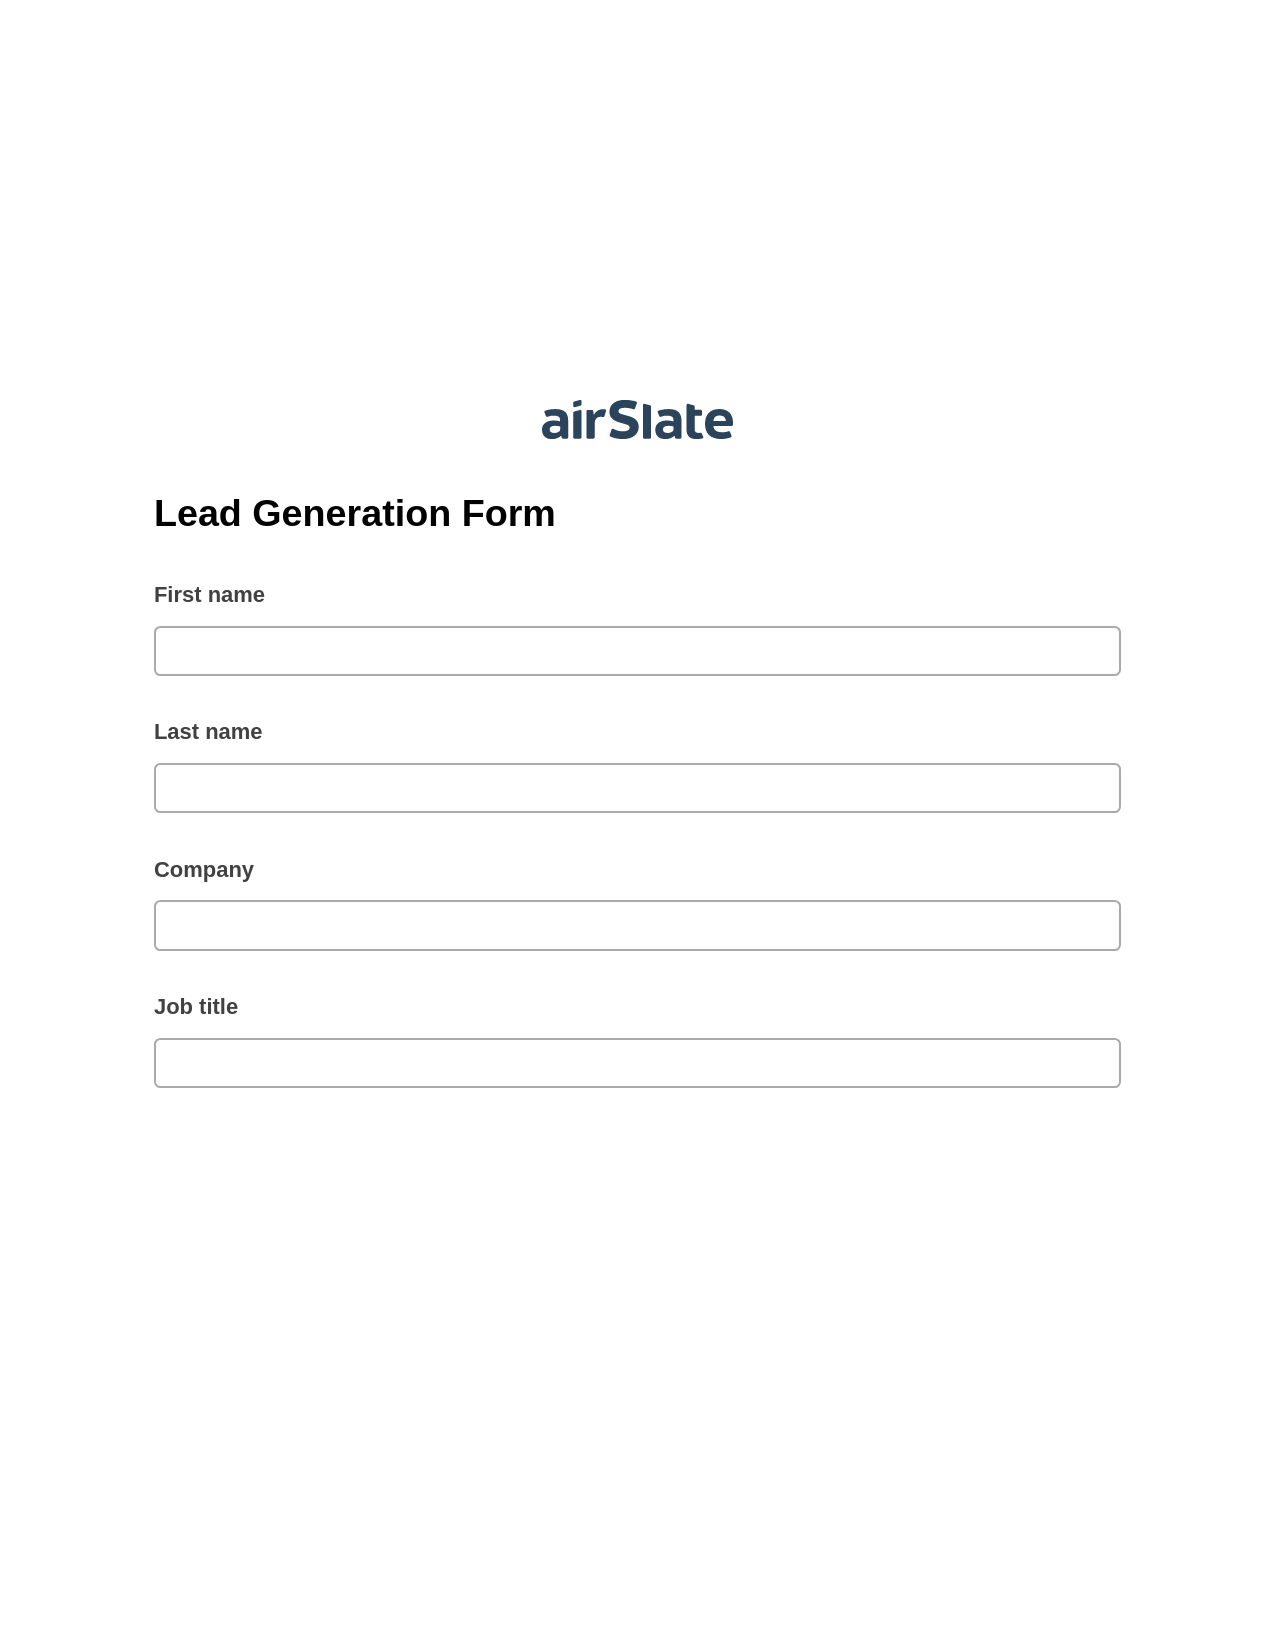 Lead Generation Form Pre-fill from another Slate Bot, Revoke Access Bot, Export to WebMerge Bot